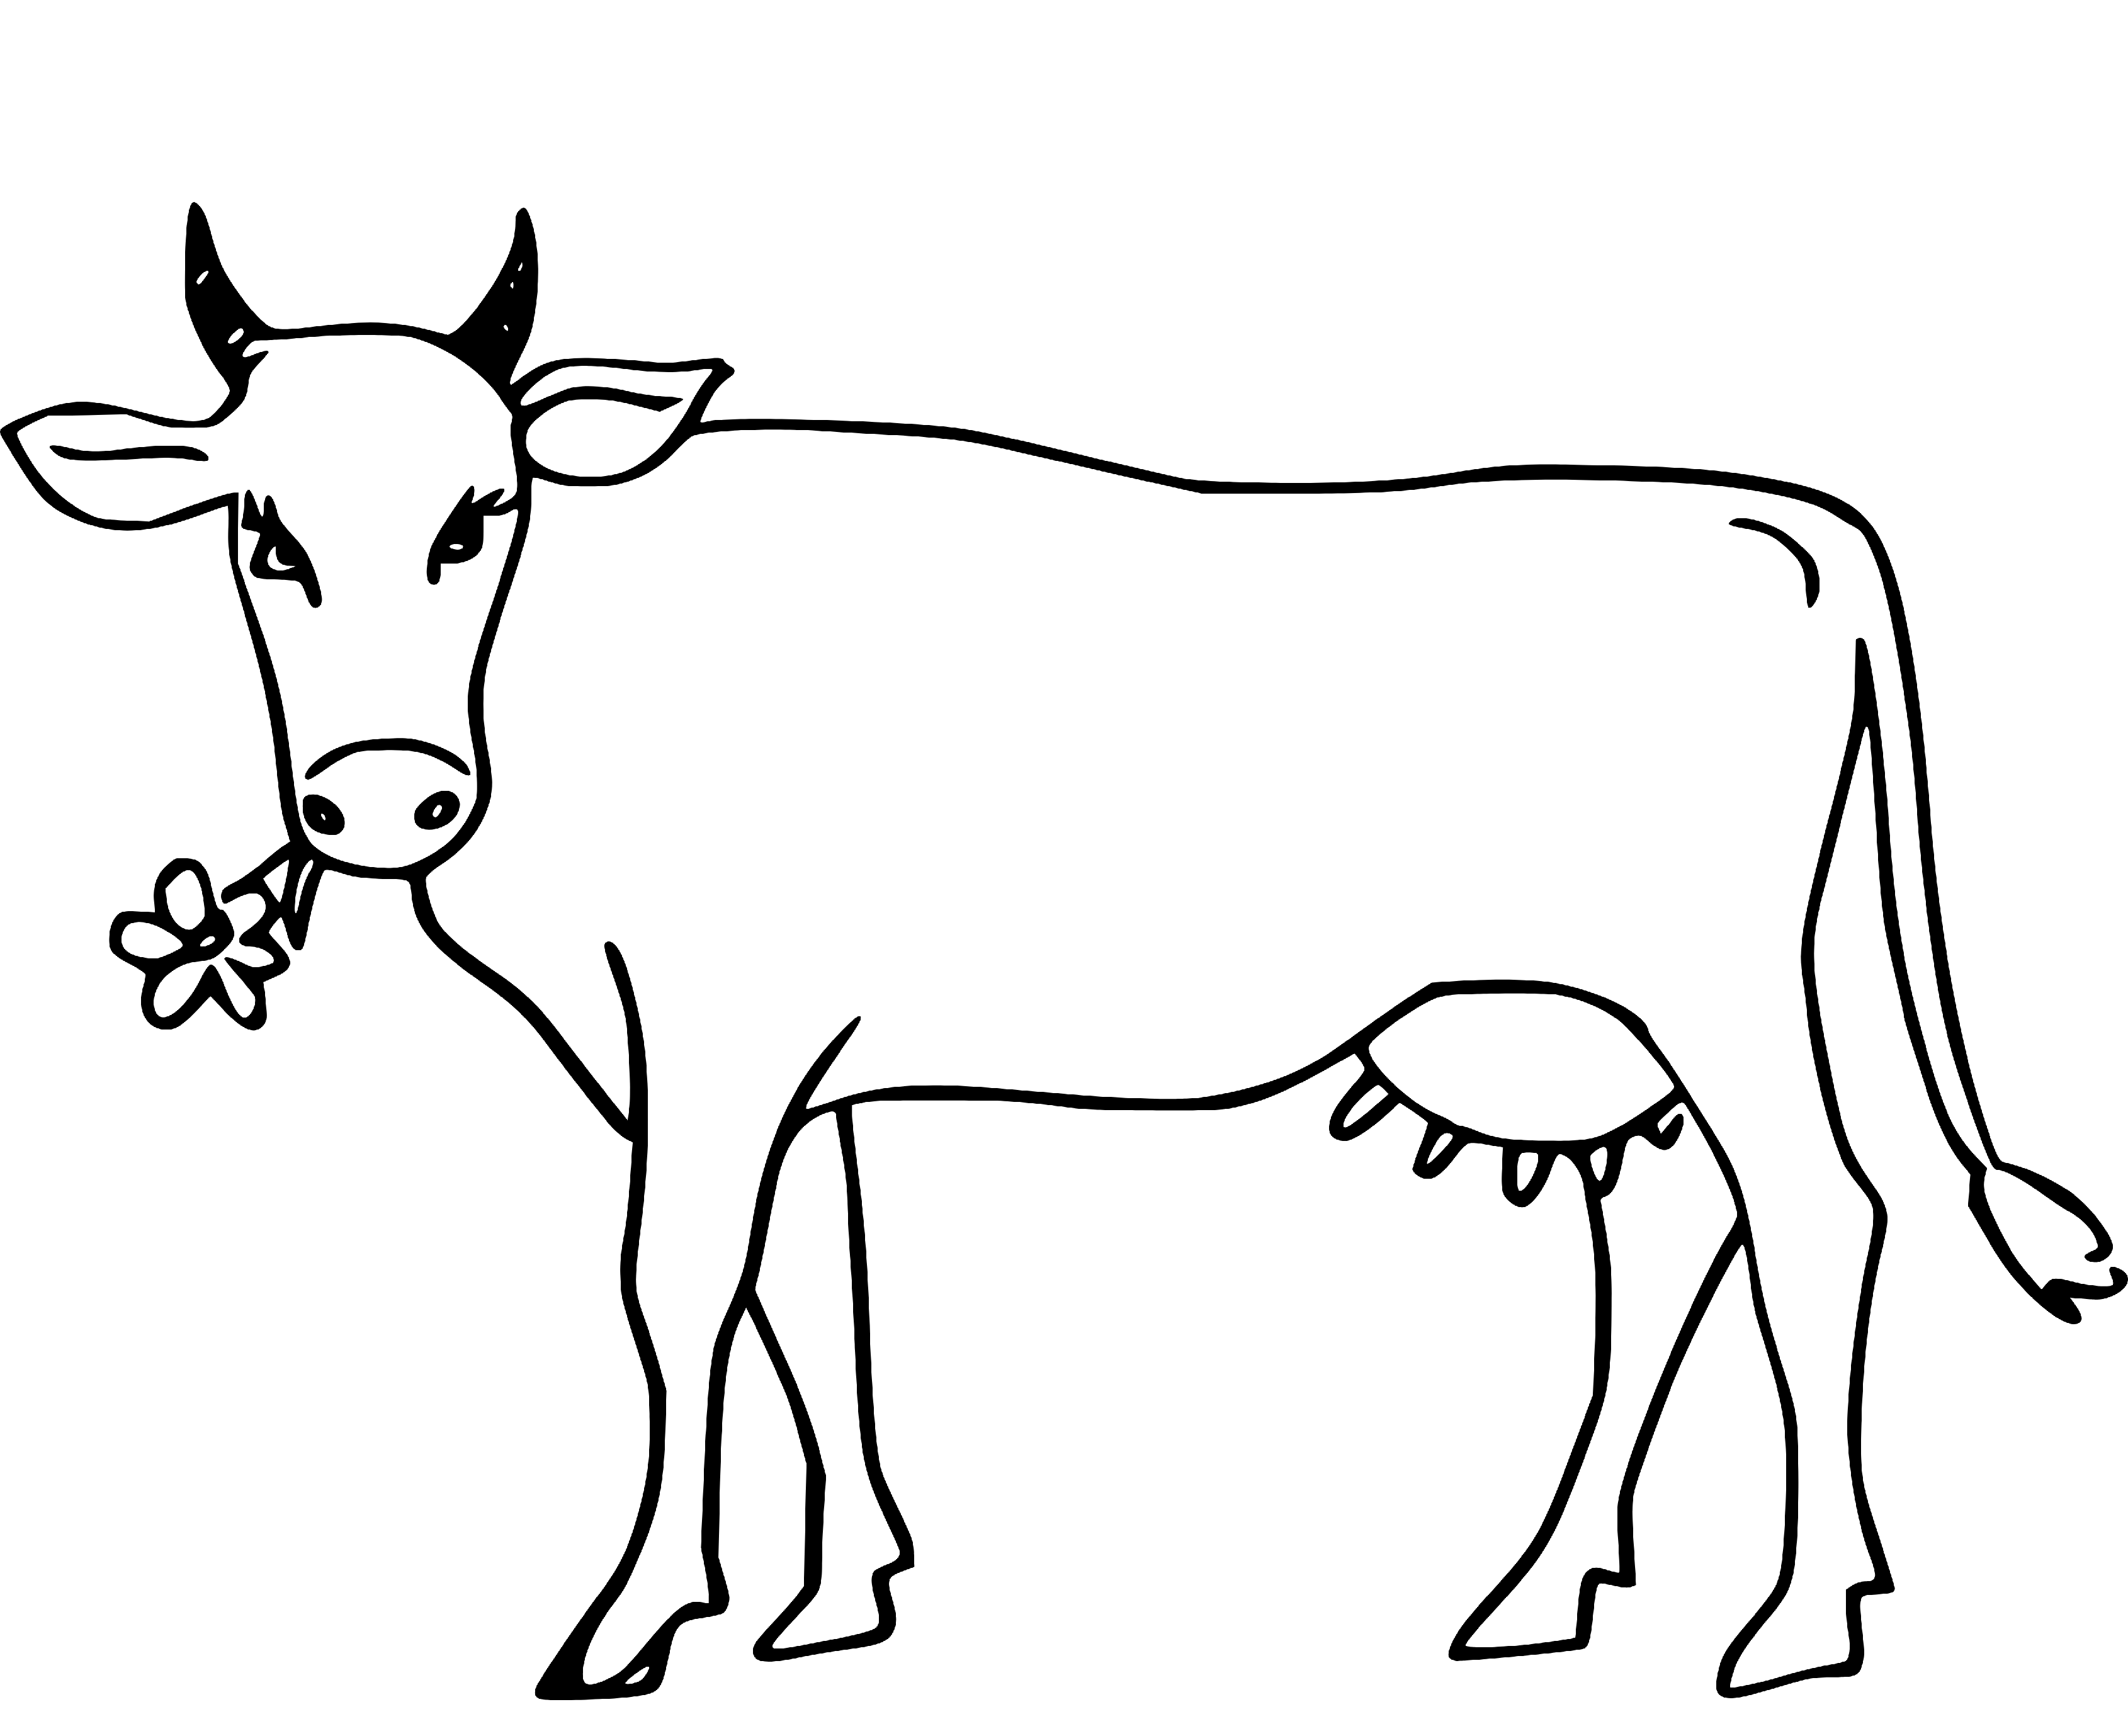 Cow eating flower Coloring Page Printable for Kids, Free, Simple and Easy, as PDF